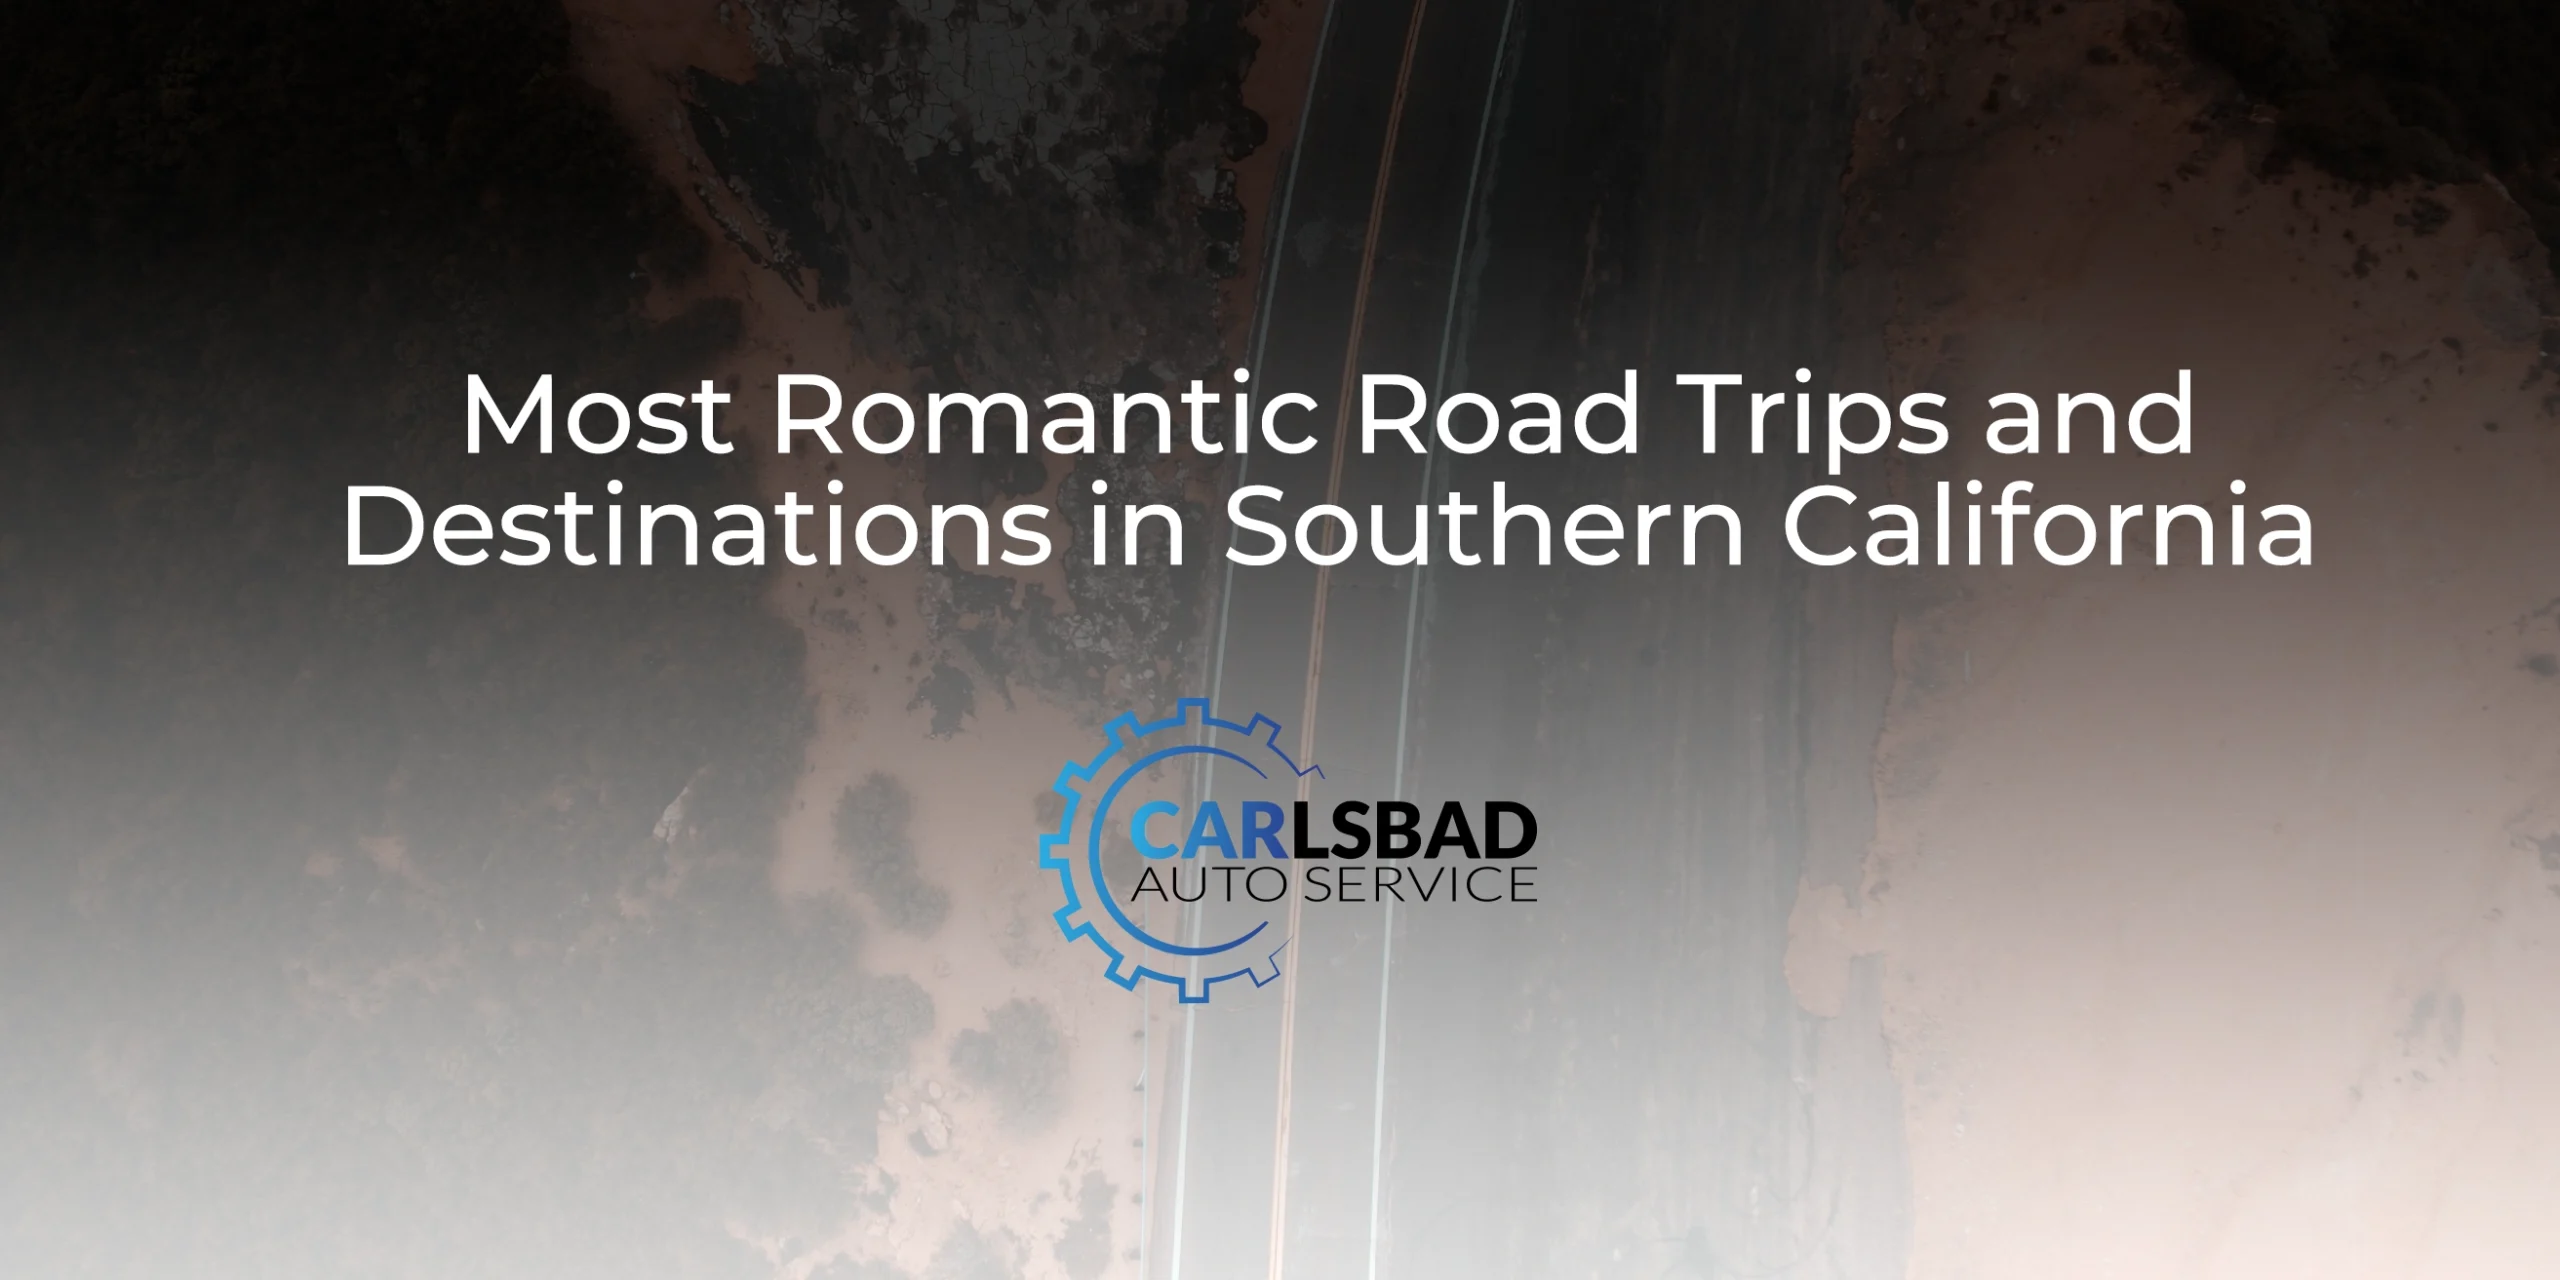 Most Romantic Road Trips and Destinations in Southern California